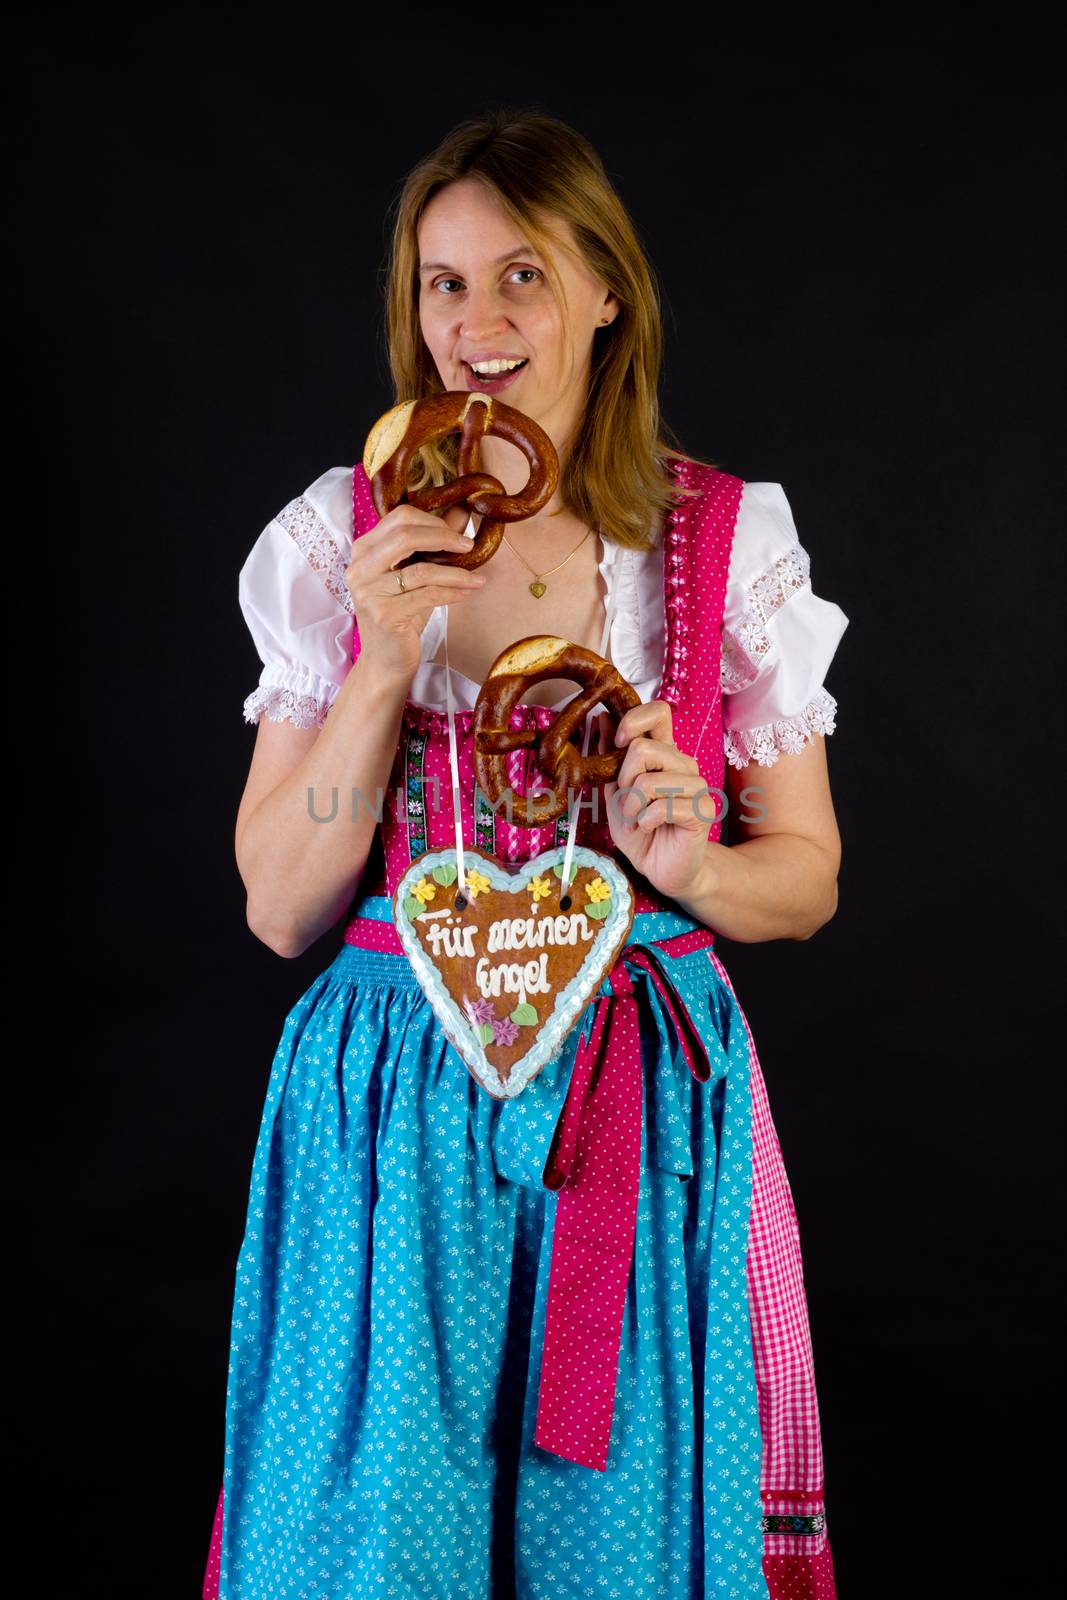 Woman in dirndl eating pretzel by gwolters